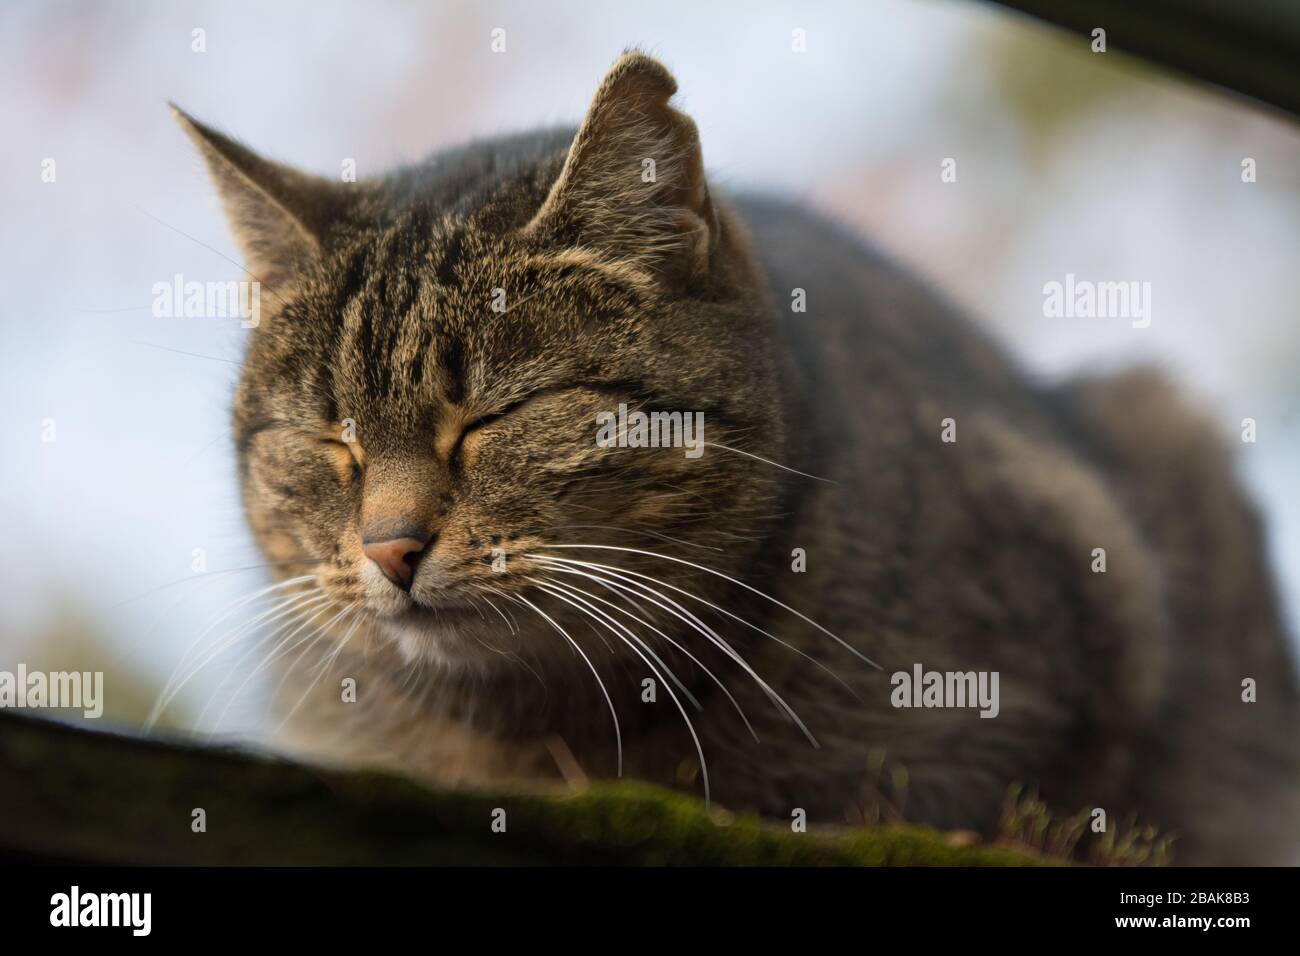 Close-up of a sprayed tabby cat with incision scar on her ear resting Stock Photo